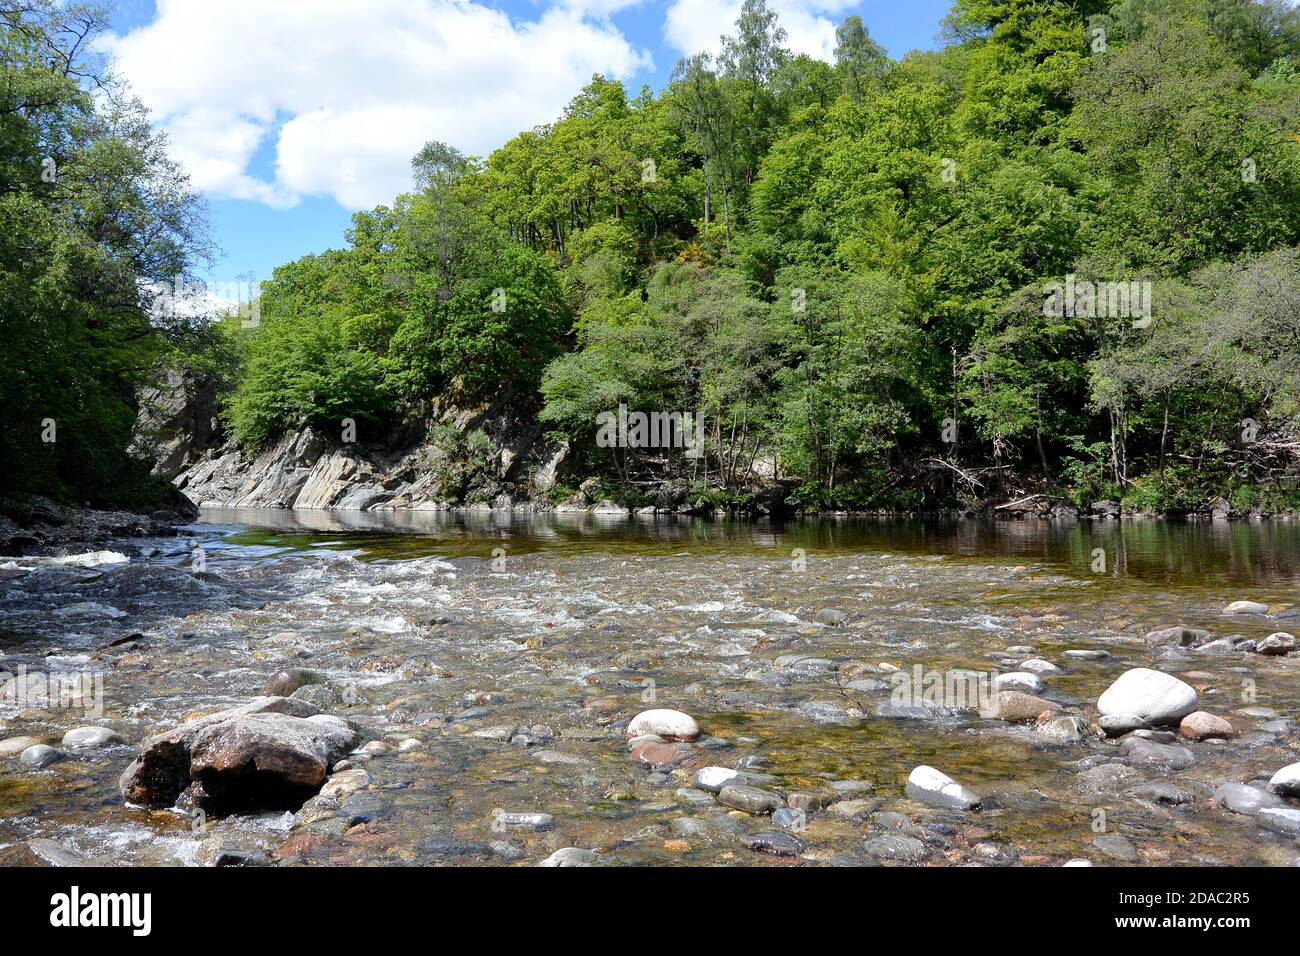 River Garry at Killiecrankie running through forest dominated by beech trees Stock Photo